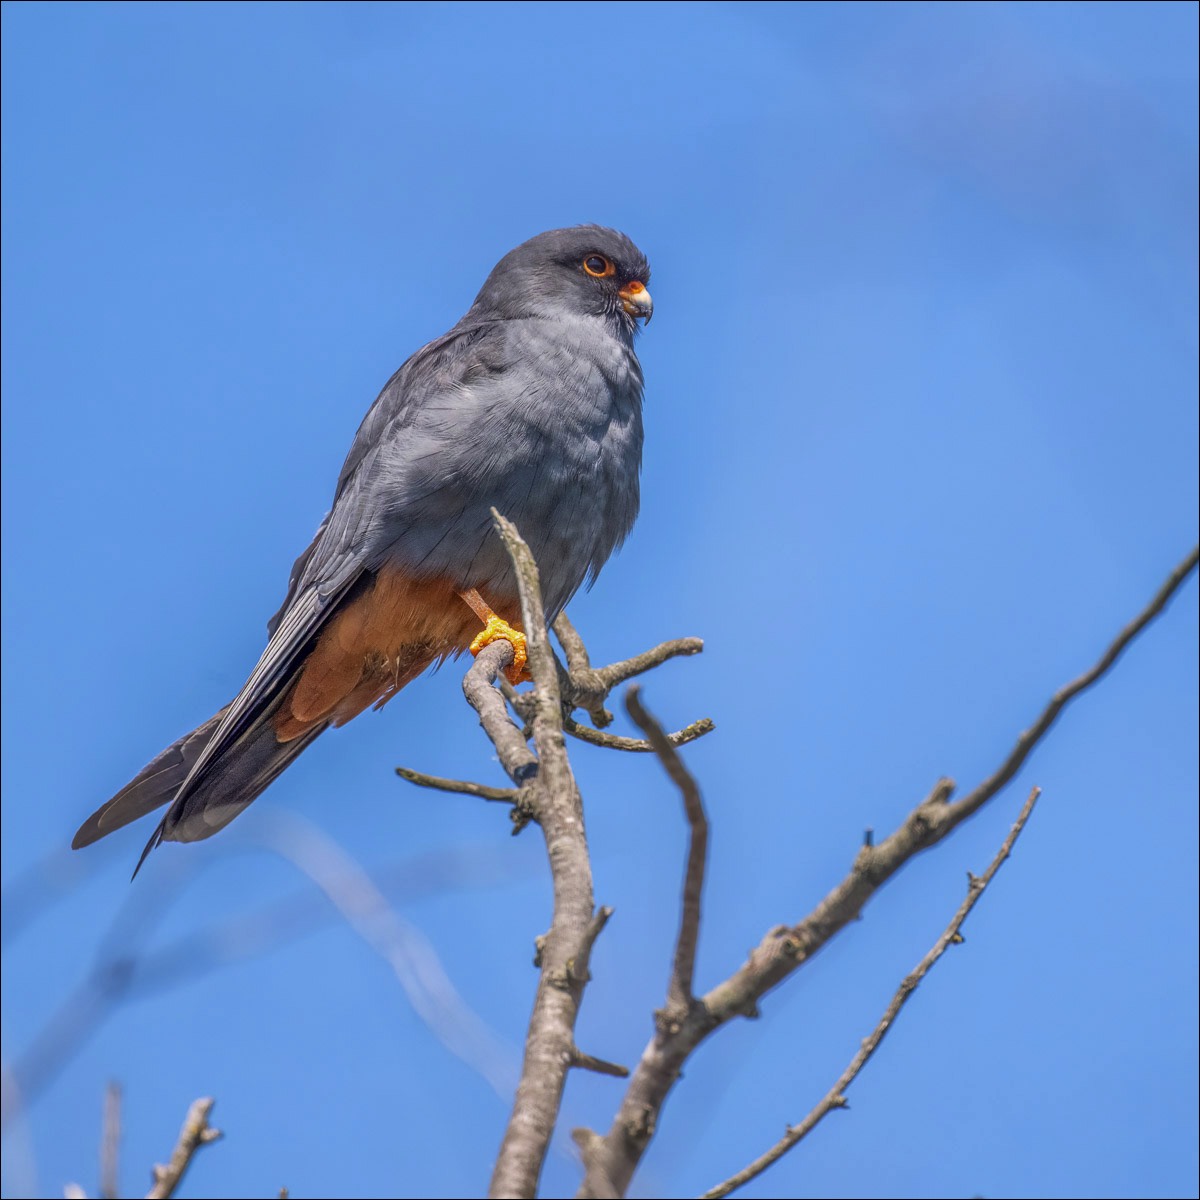 Red-footed Falcon (Roodpootvalk)